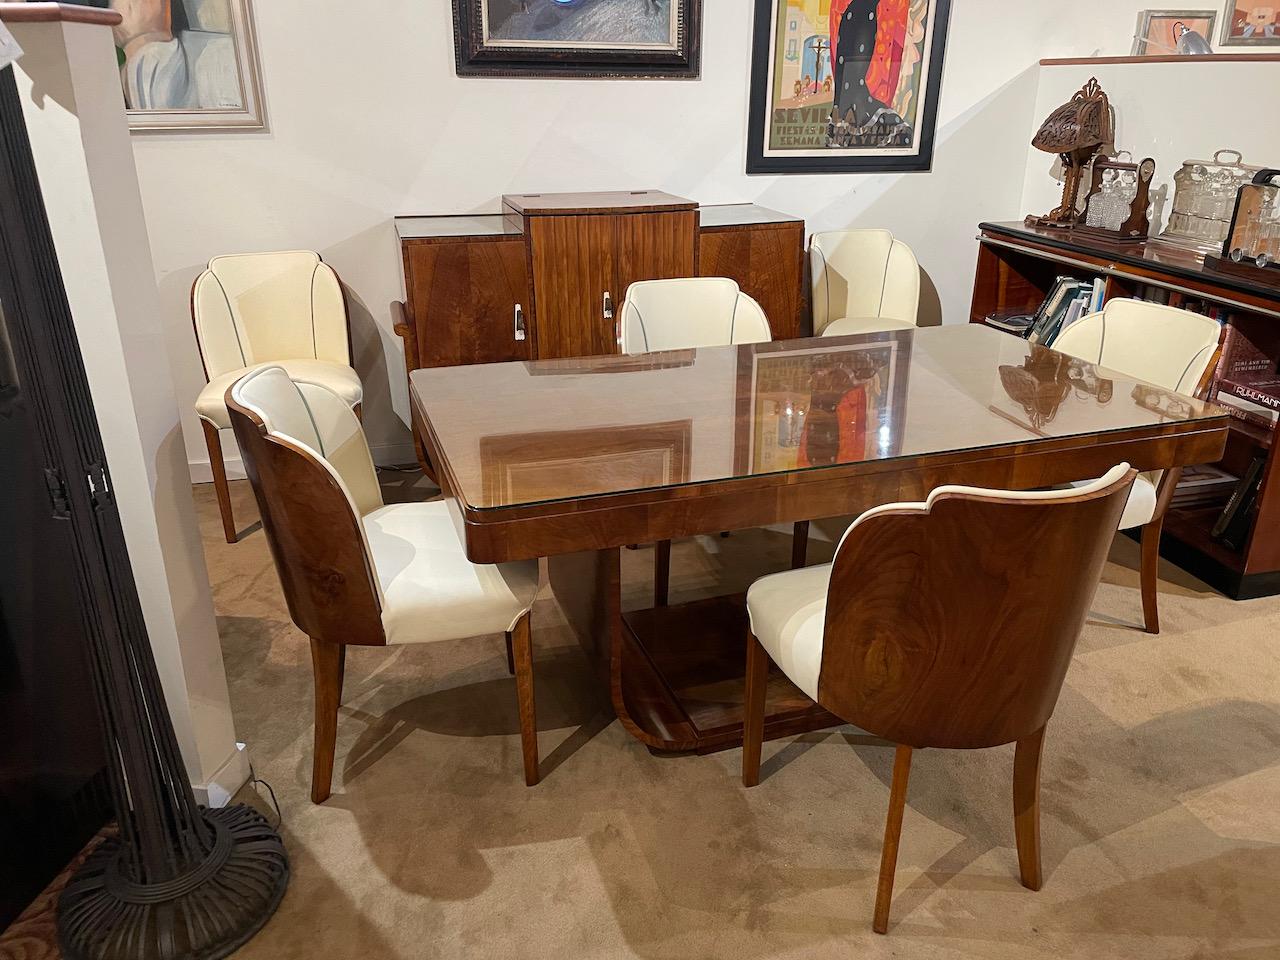 A stunning original Art Deco period buirl walnut dining suite by Epstein. This consists of six amazing cloud-back dining chairs and a twin pedestal dining table. This is all made from stunning burl walnut, the dining table has original glass custom